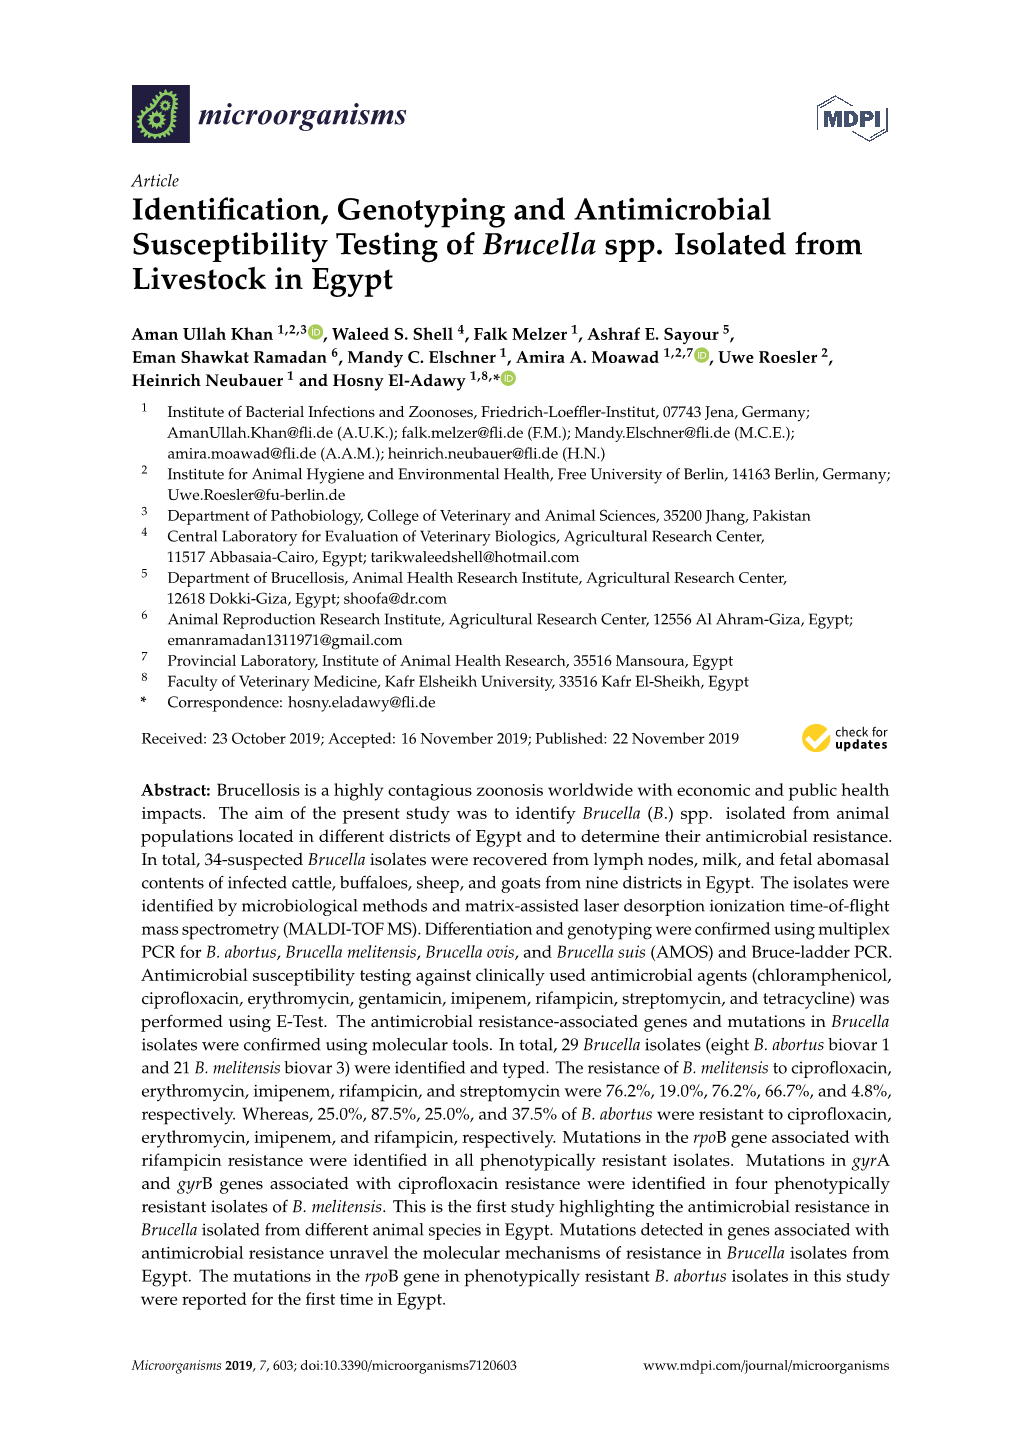 Identification, Genotyping and Antimicrobial Susceptibility Testing